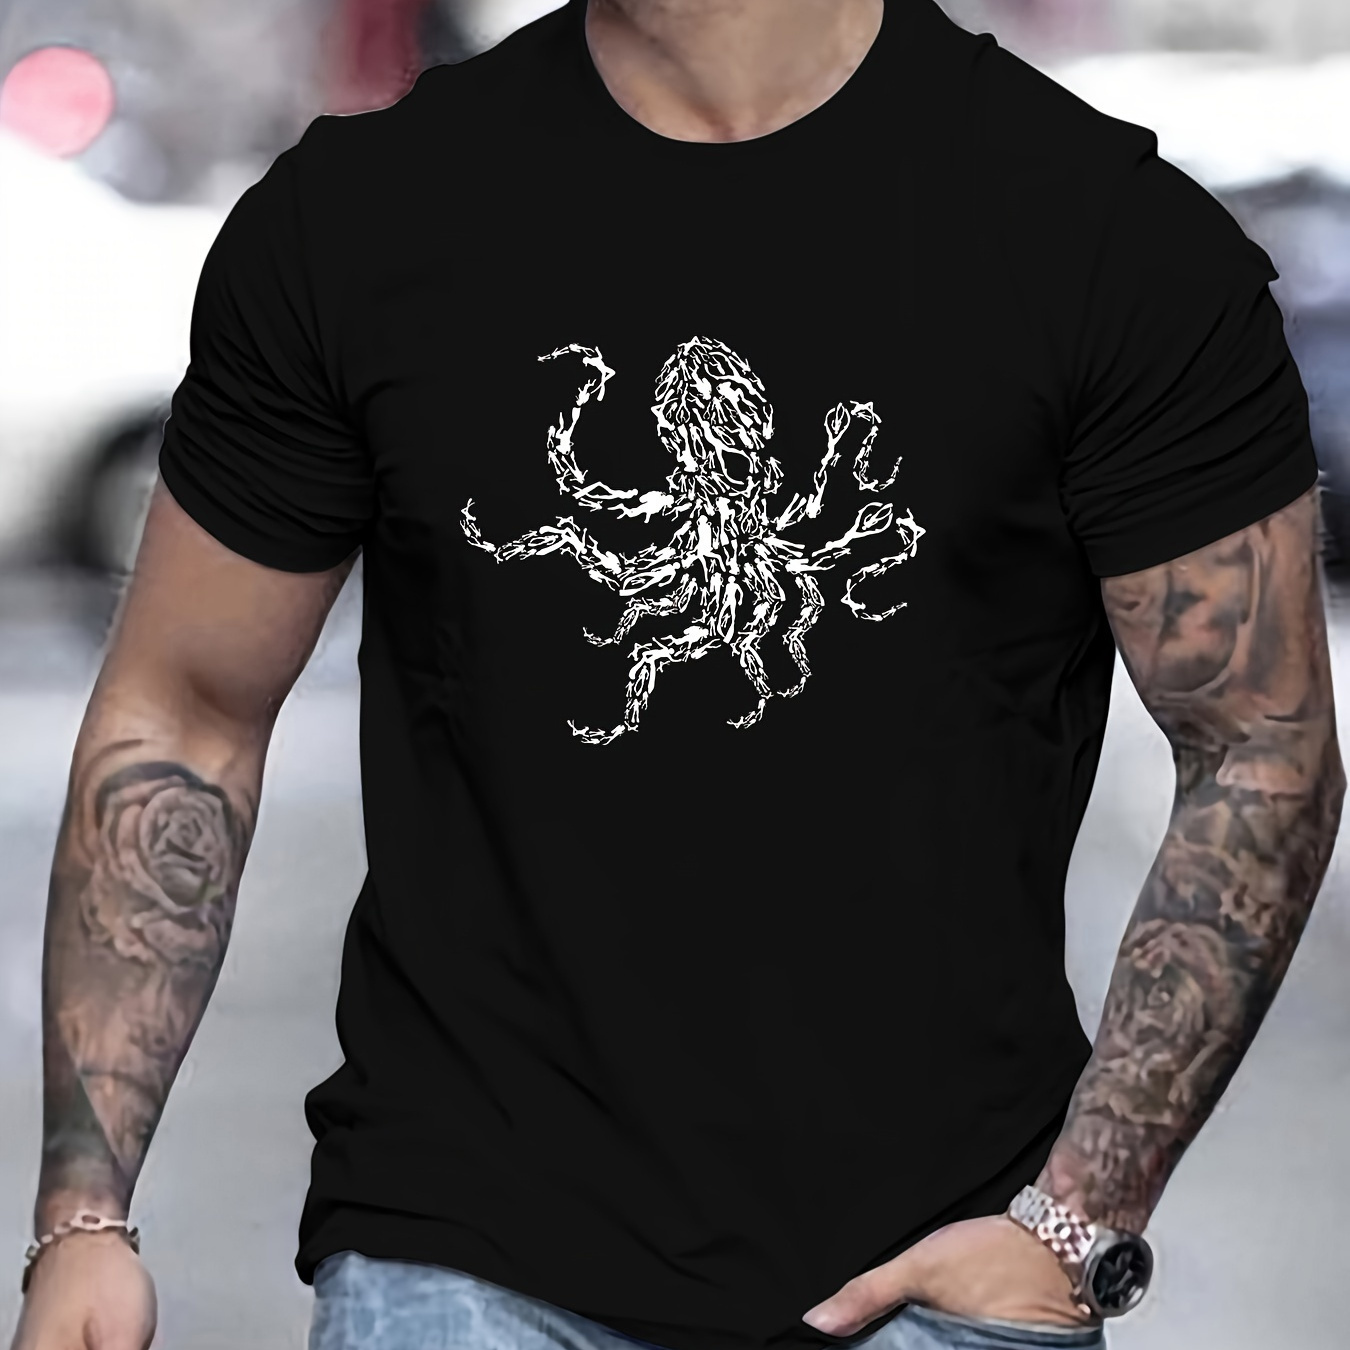 

Diver Group Octopus Pattern Print Men's T-shirt Short Sleeve Crew Neck Tops Cotton Comfortable Breathable Spring Summer Clothing For Men